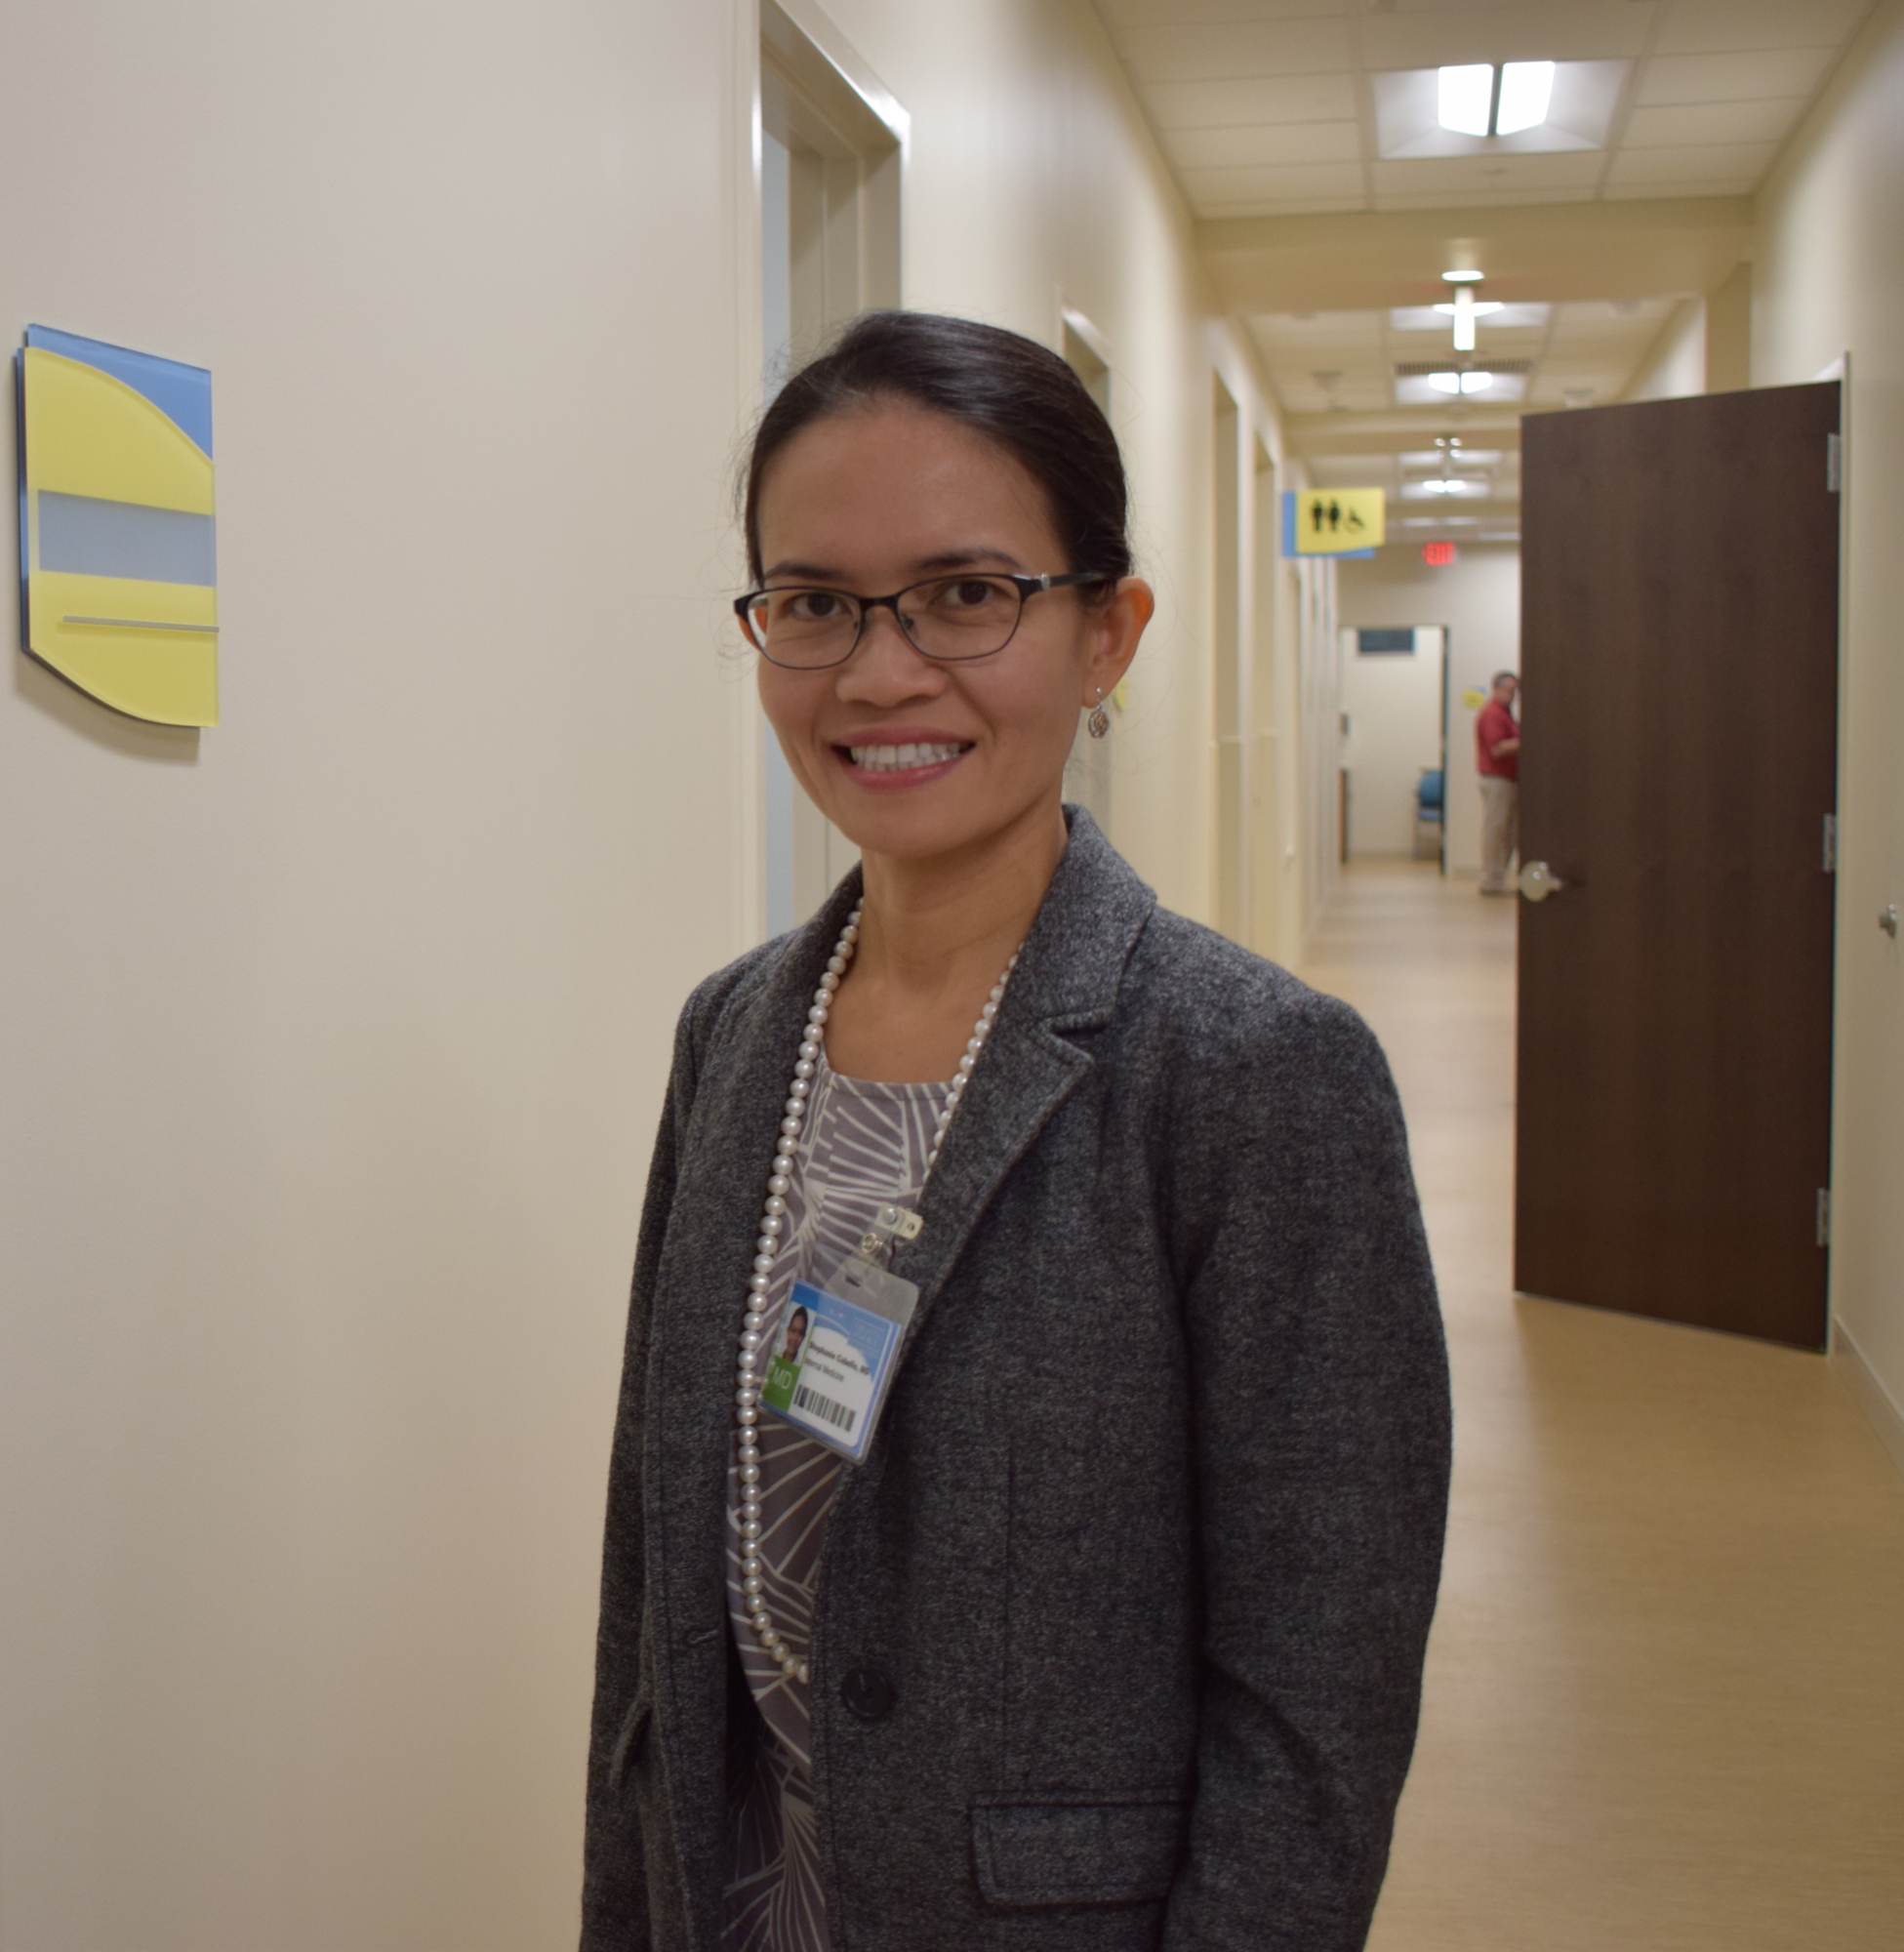 Dr. Stephanie Cabello is one of three physicians at the new FPG Internal Medicine at Lorraine Corners.